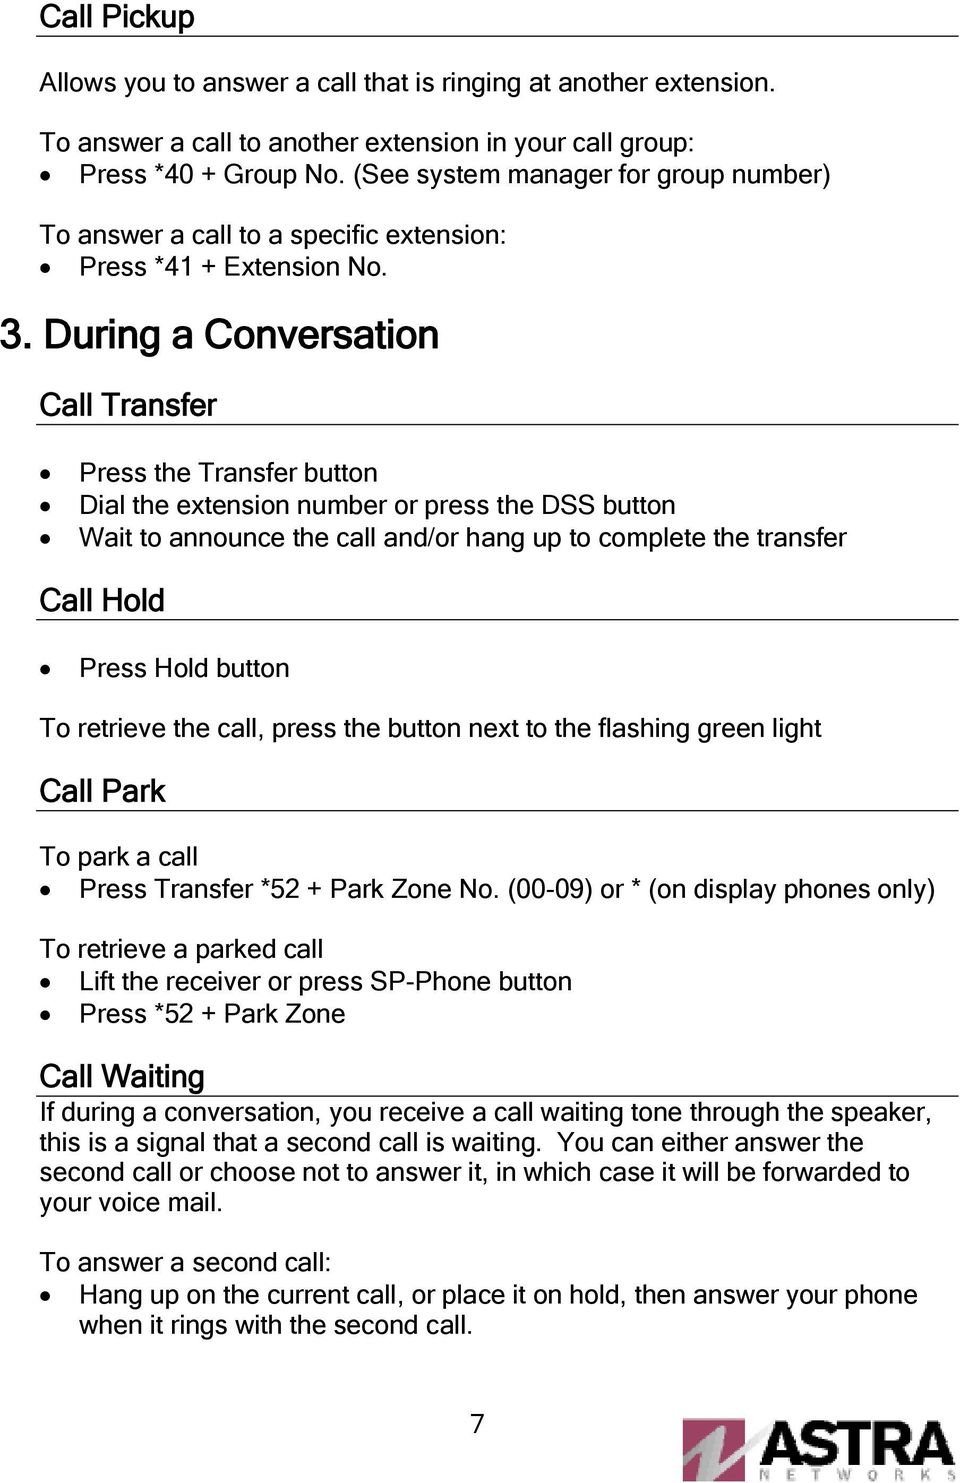 During a Conversation Call Transfer Press the Transfer button Dial the extension number or press the DSS button Wait to announce the call and/or hang up to complete the transfer Call Hold Press Hold